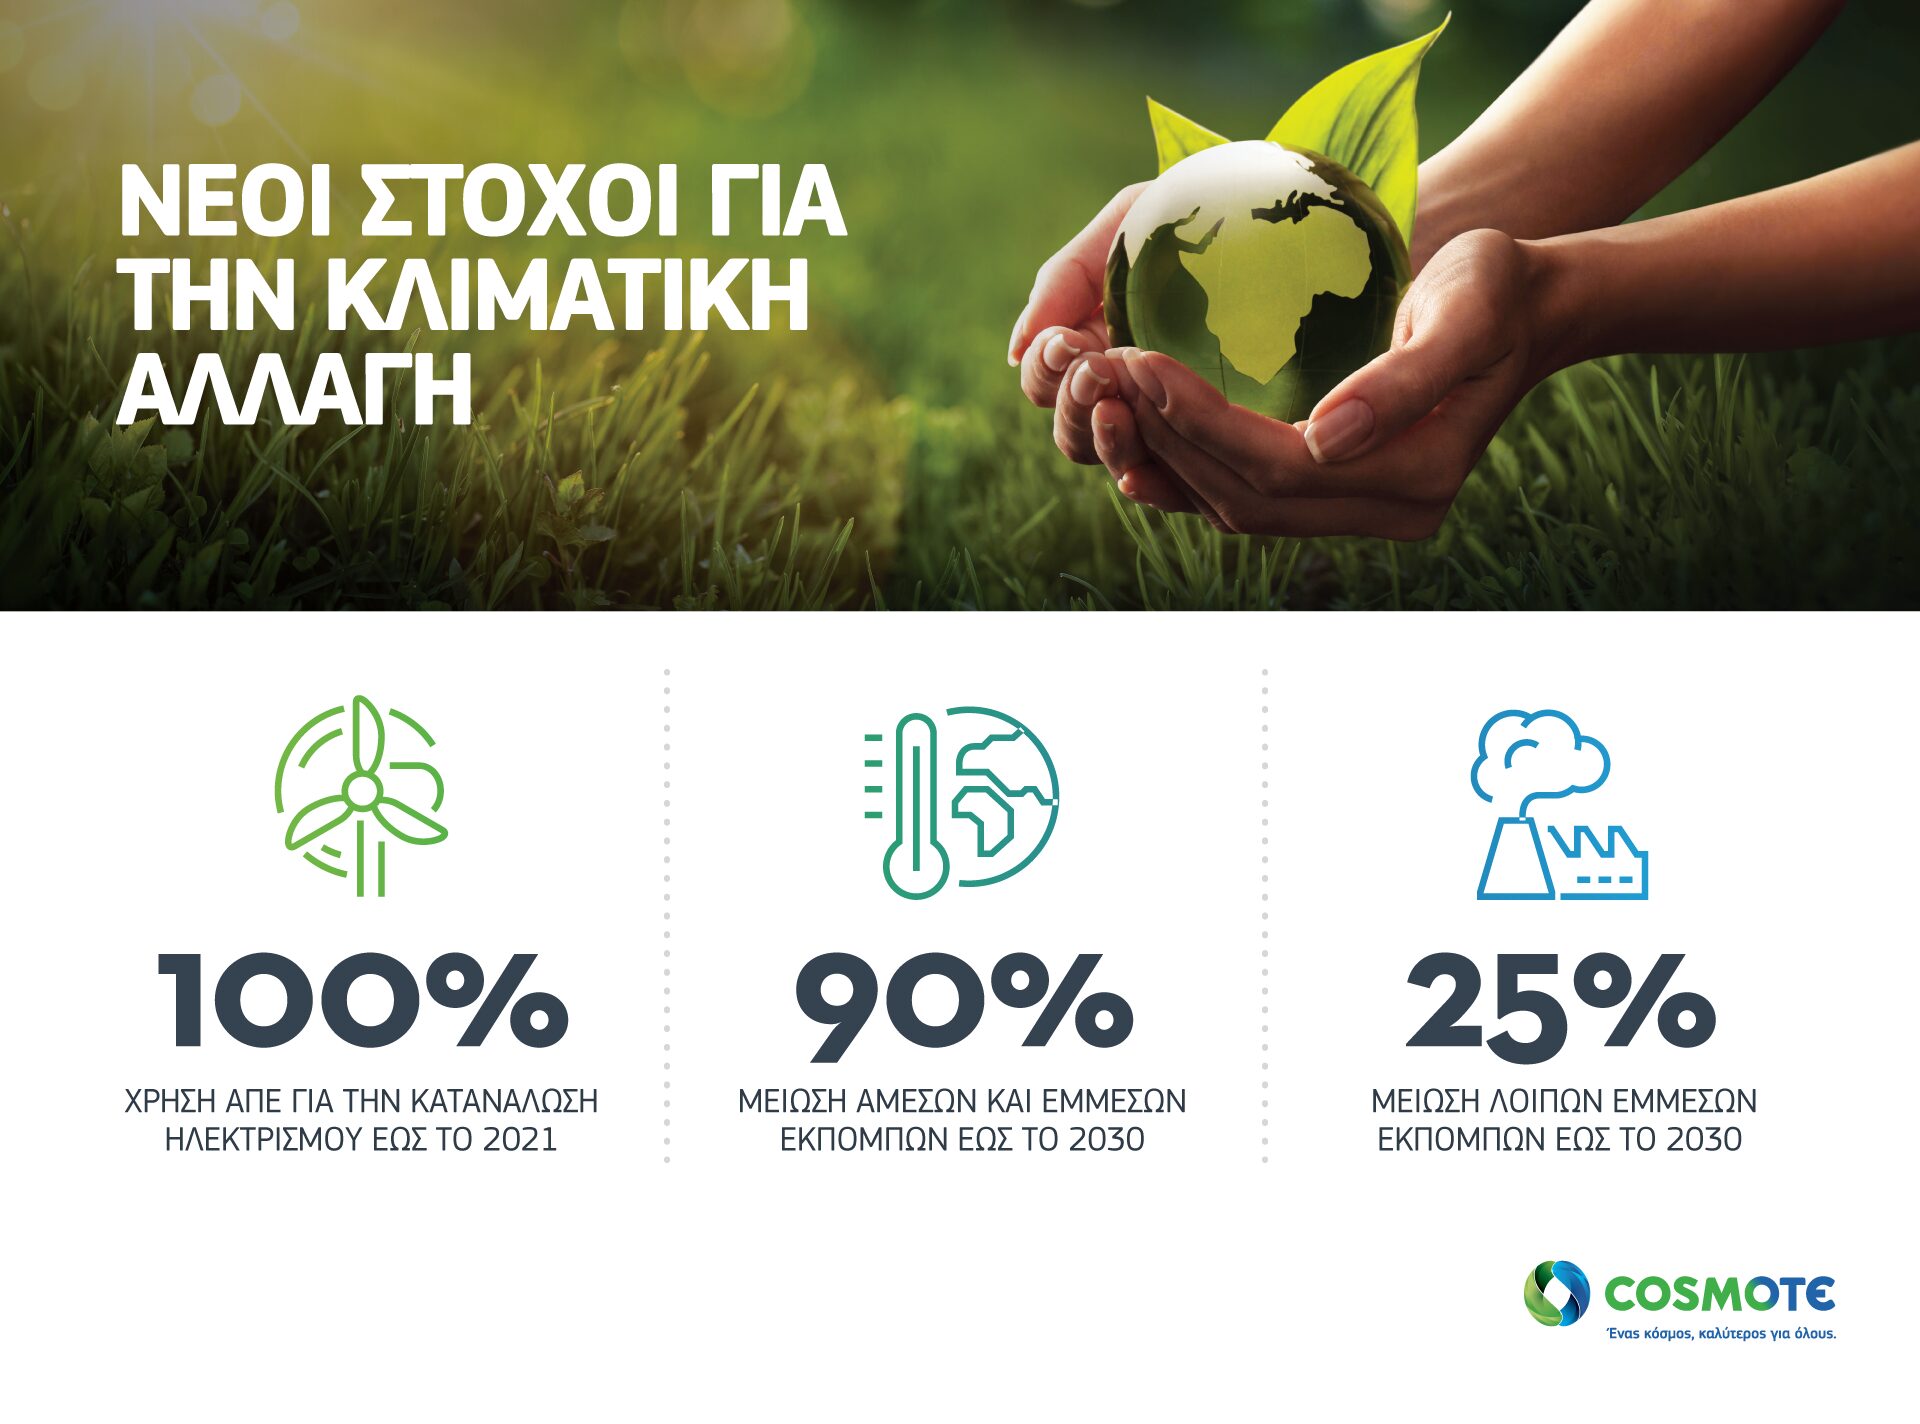 COSMOTE ClimateChanges